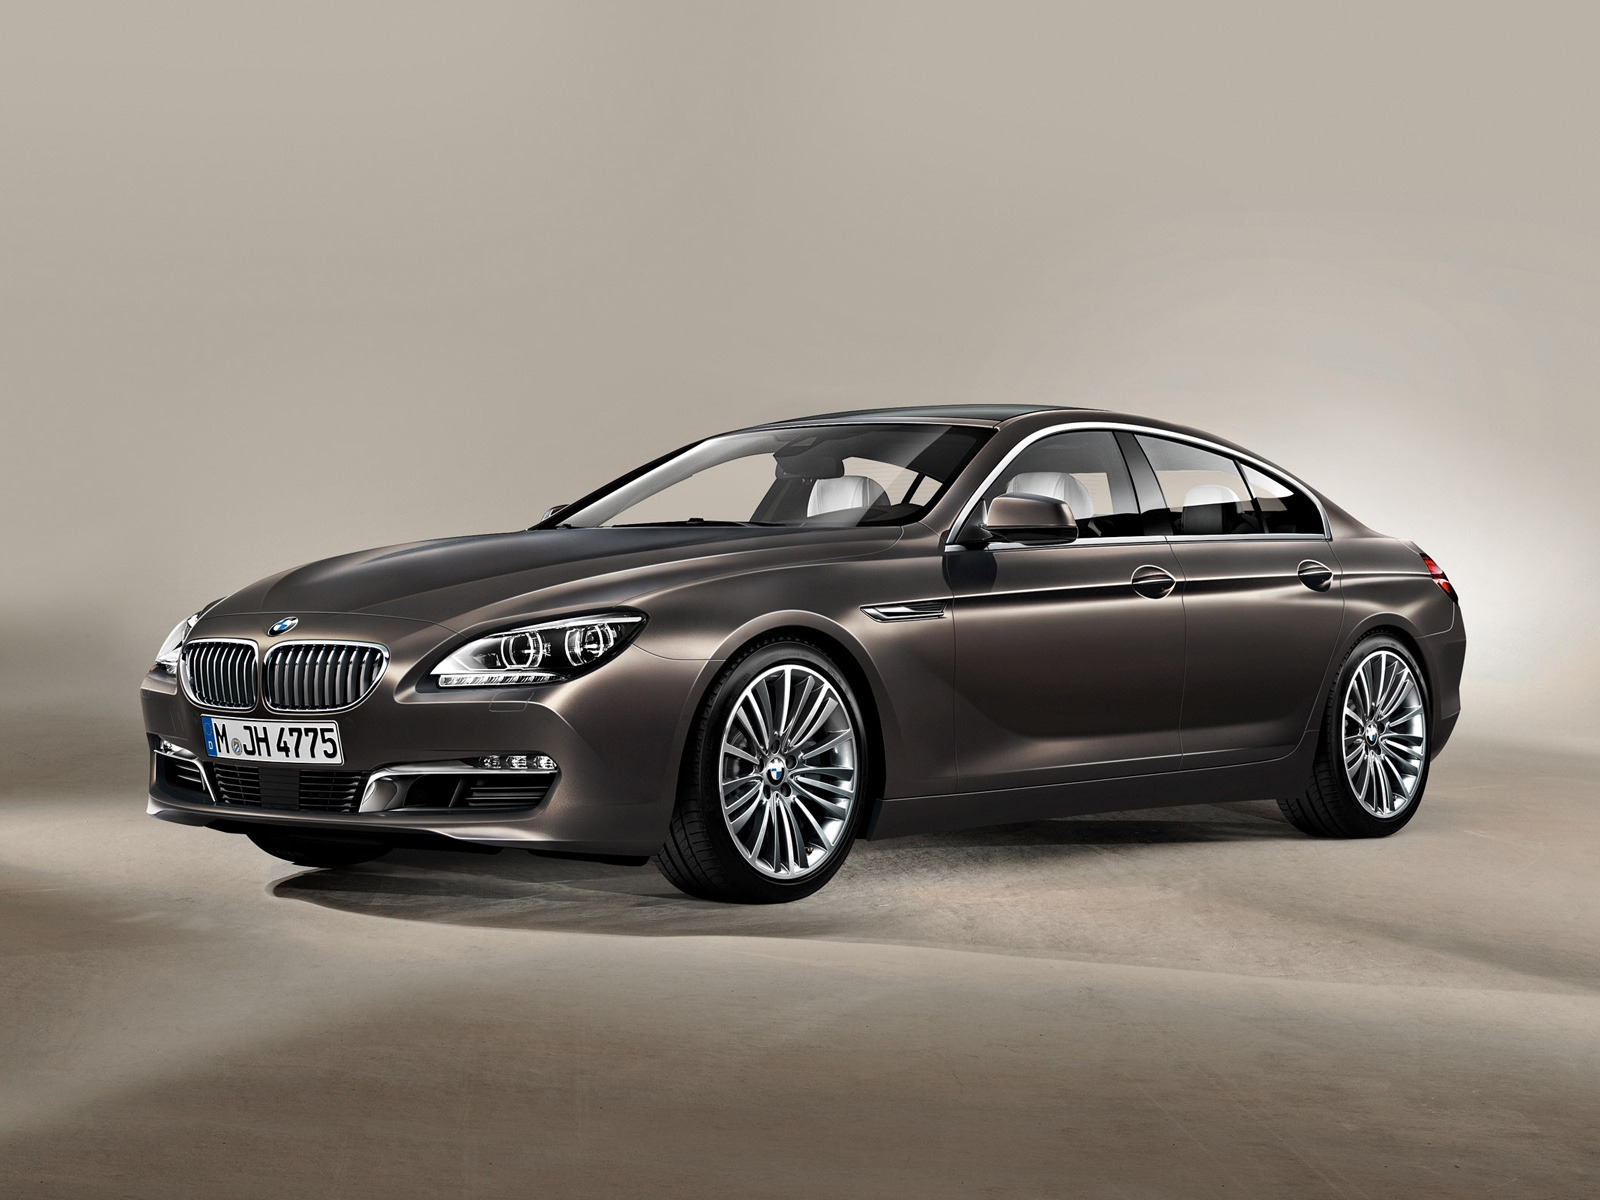 2013 BMW 6 Series Gran Coupe Studio for 1600 x 1200 resolution